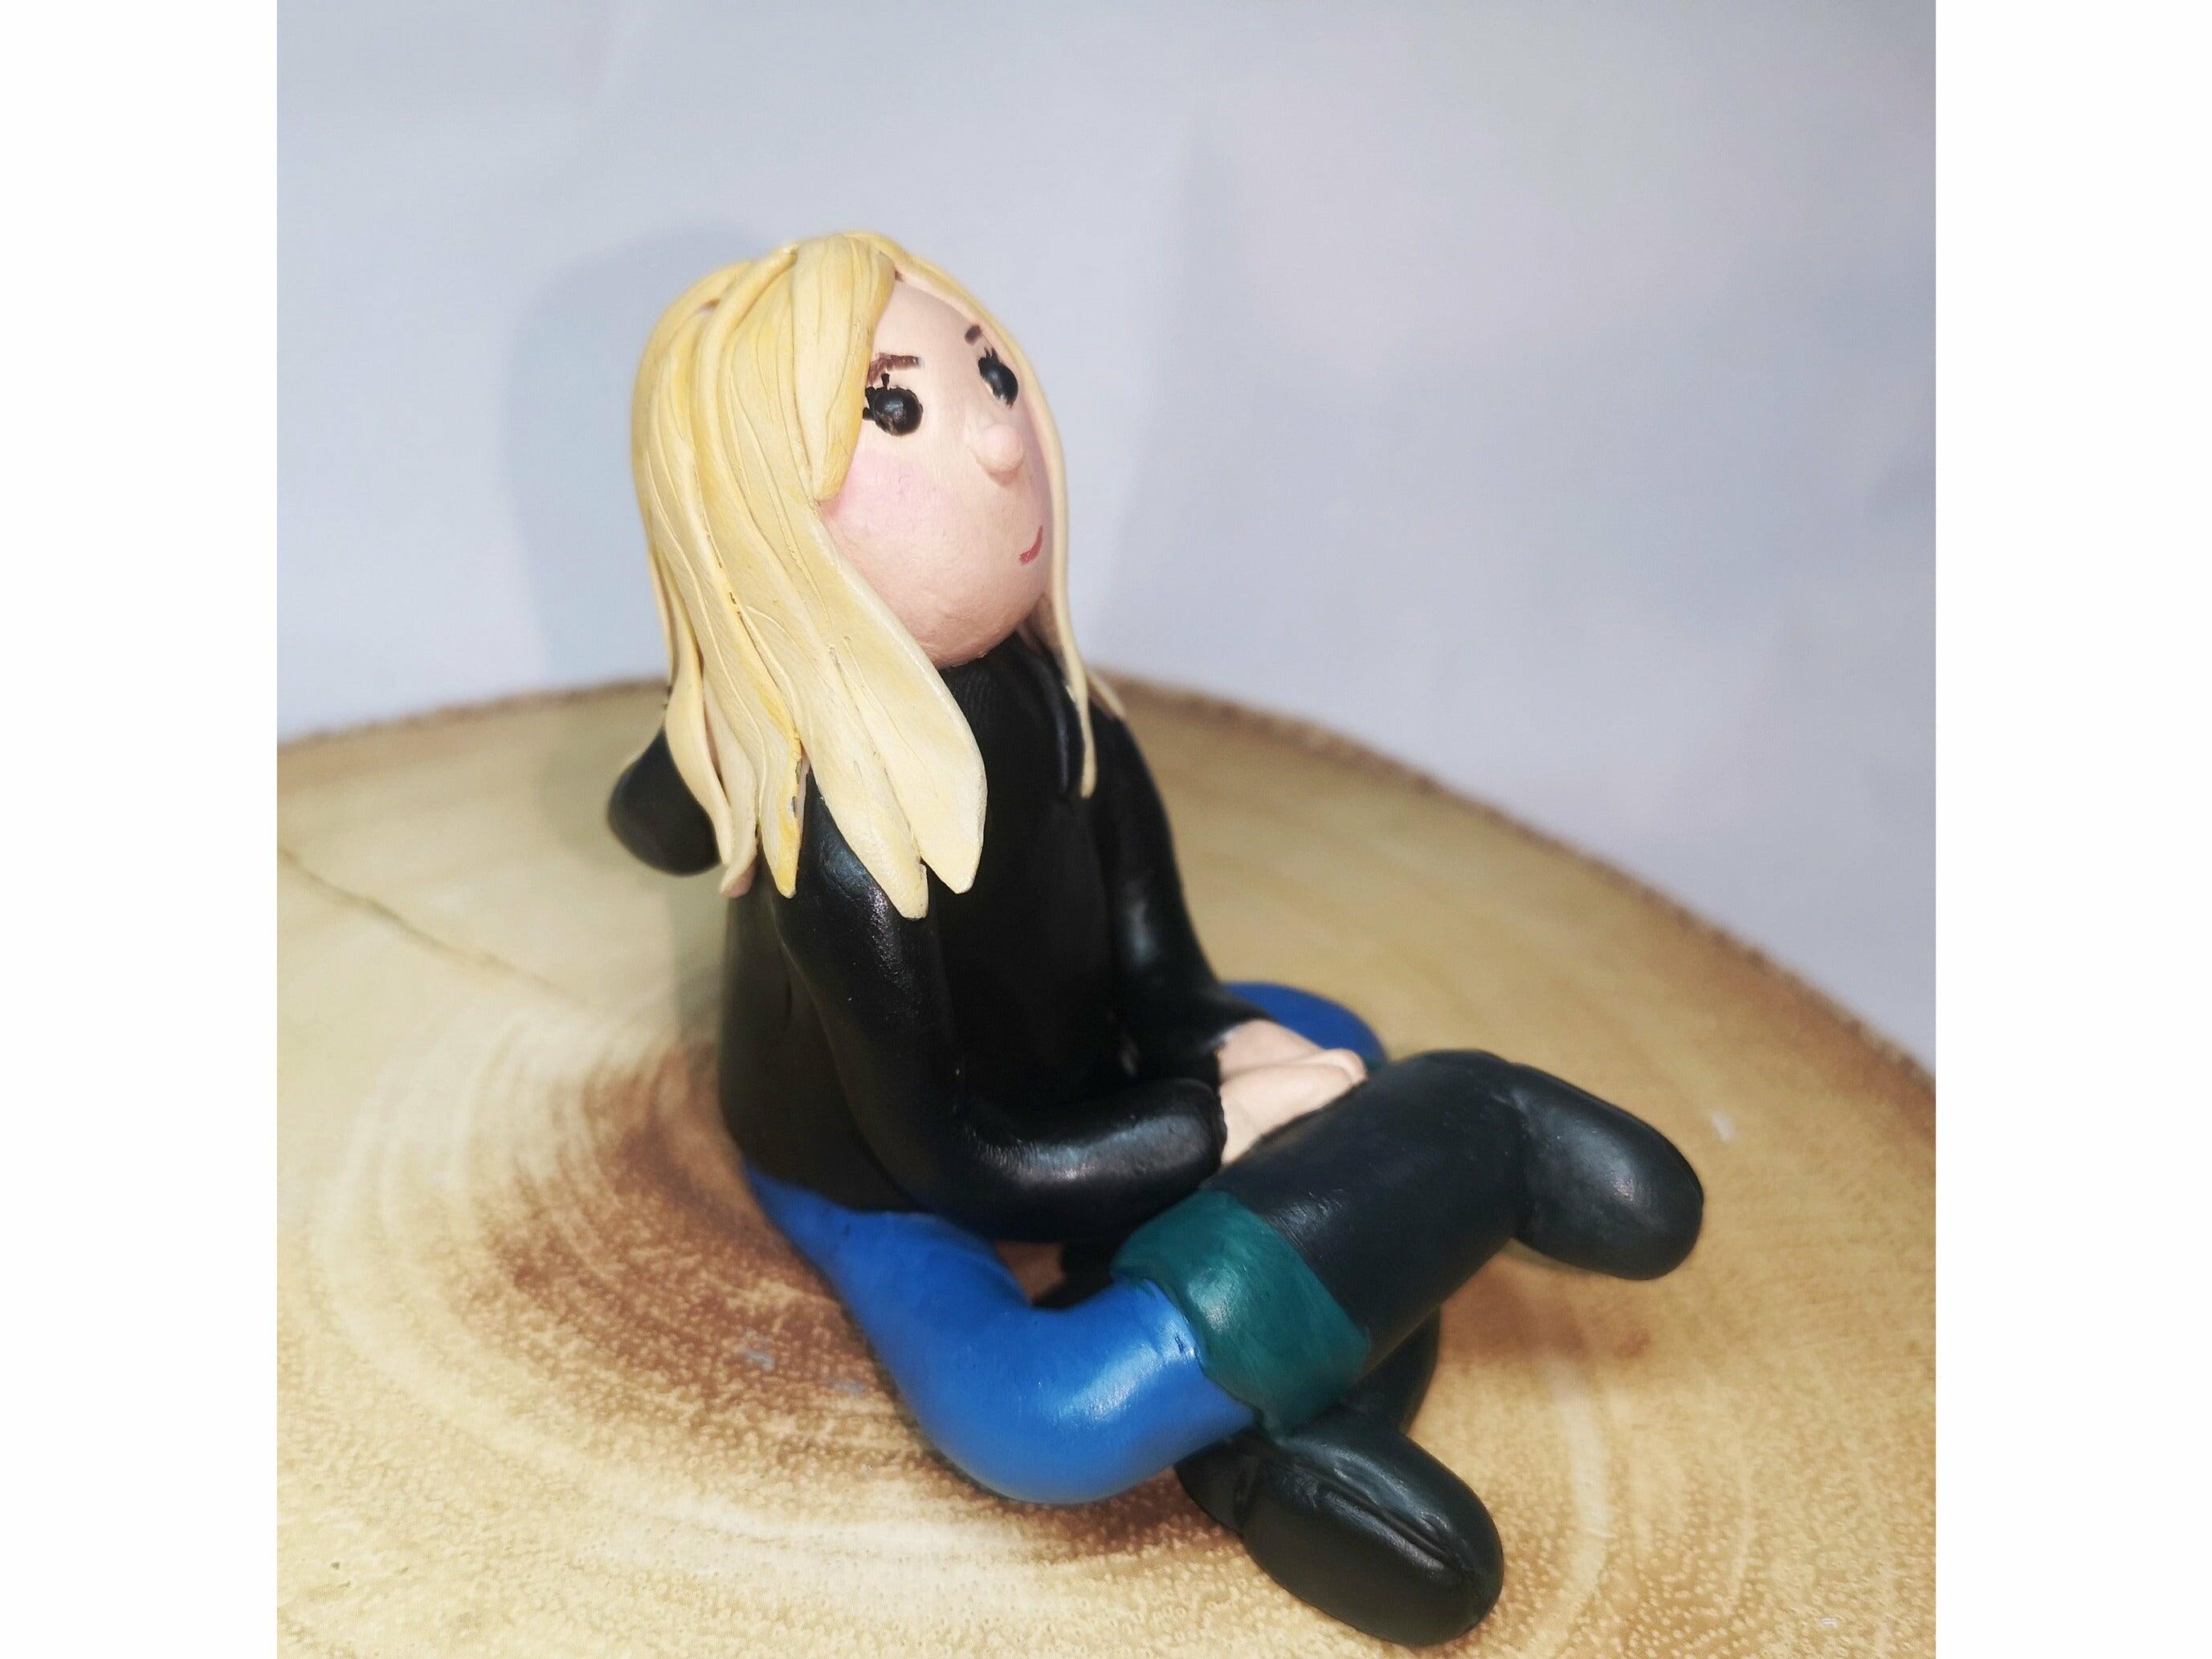 A side profile of a clay model of a young blonde girl wearing a hoody and wellington boots